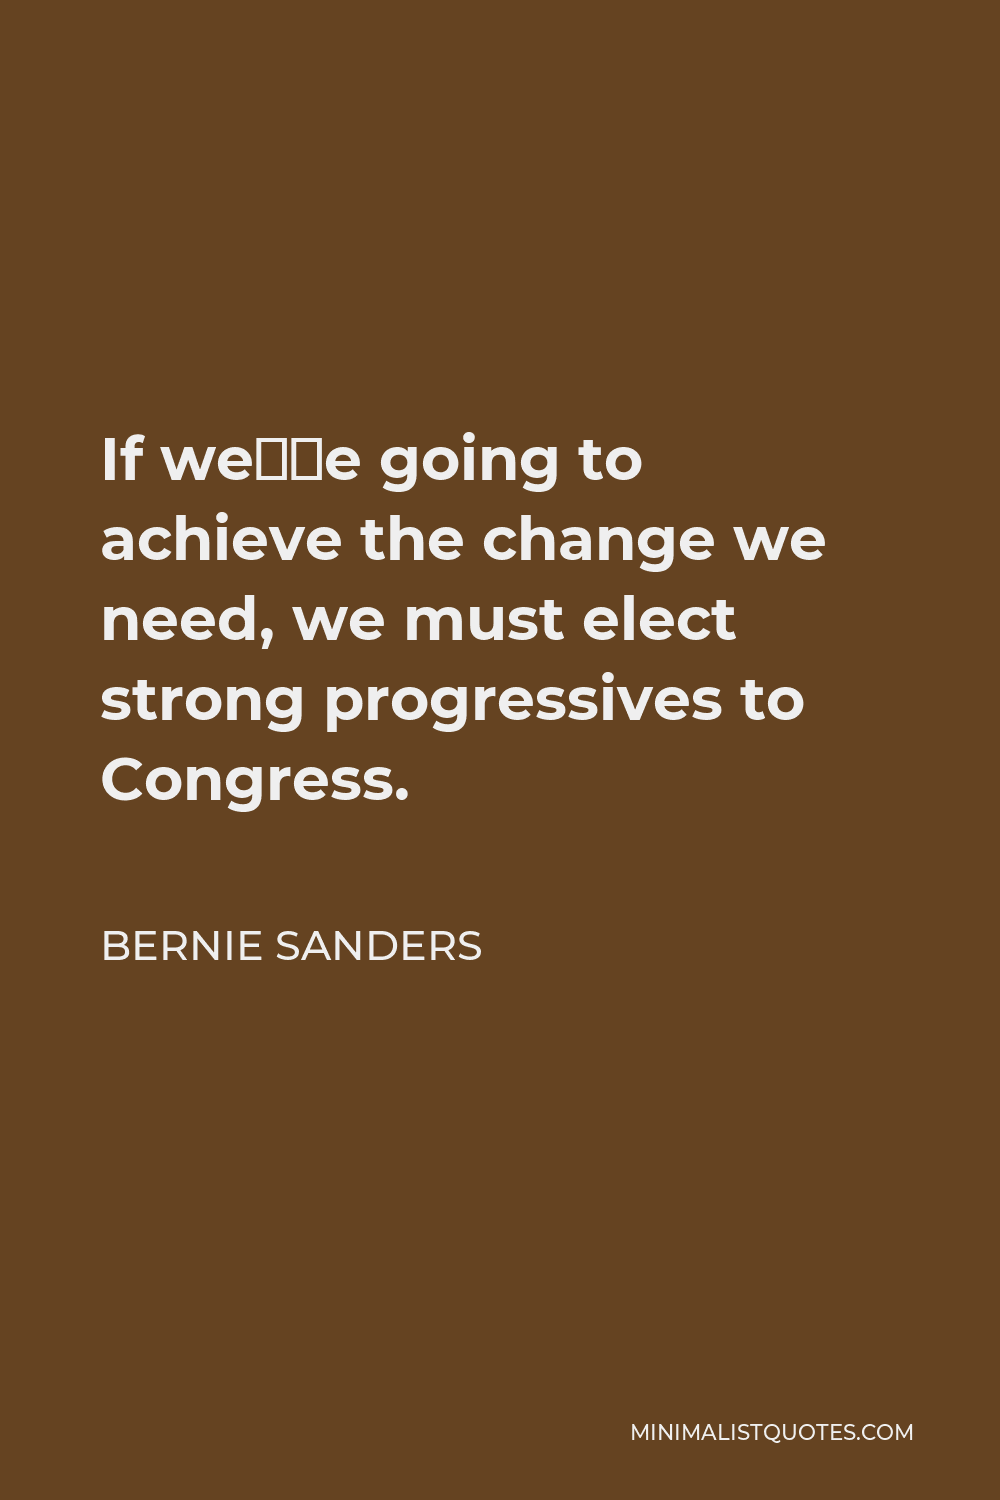 Bernie Sanders Quote - If we’re going to achieve the change we need, we must elect strong progressives to Congress.